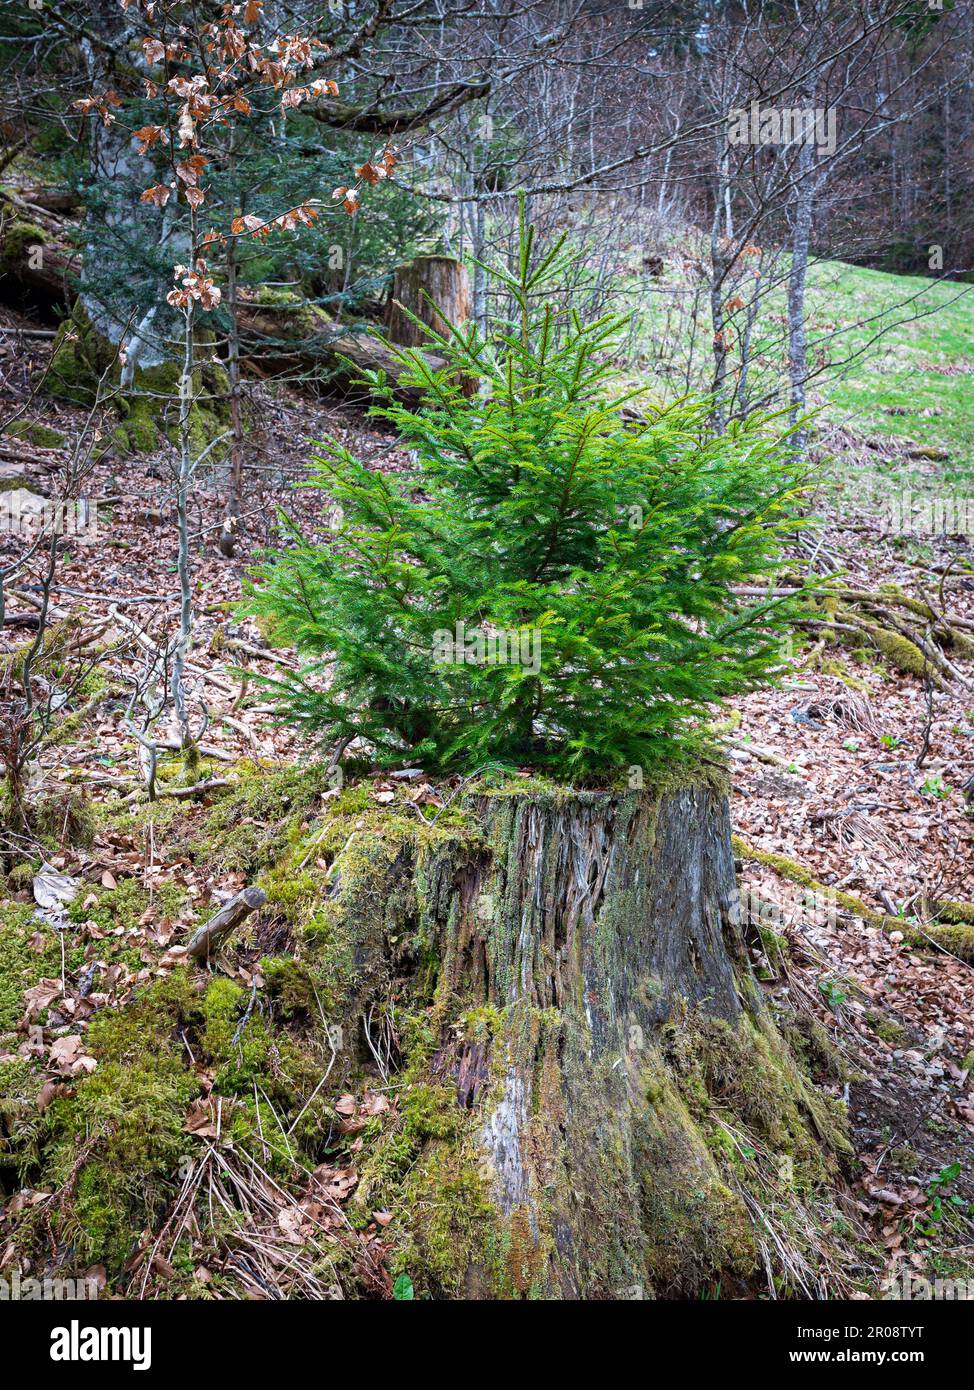 A young spruce tree (Picea abies) has grown out of a sawn down very old fir tree Stock Photo